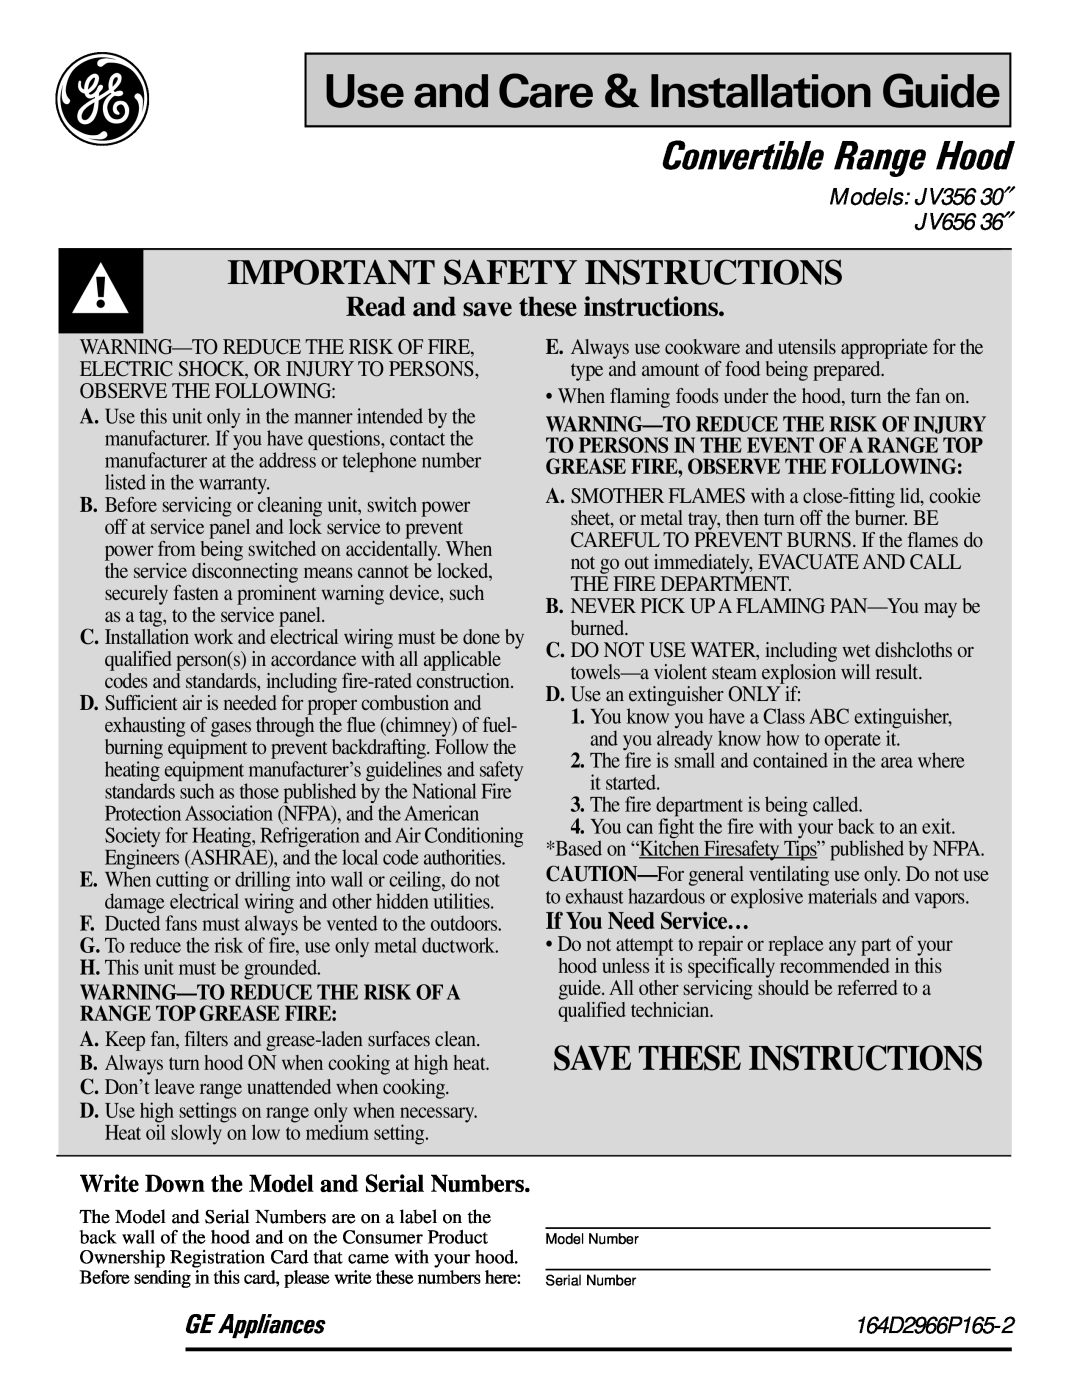 GE JV656 36 important safety instructions Important Safety Instructions, Save These Instructions, If You Need Service… 